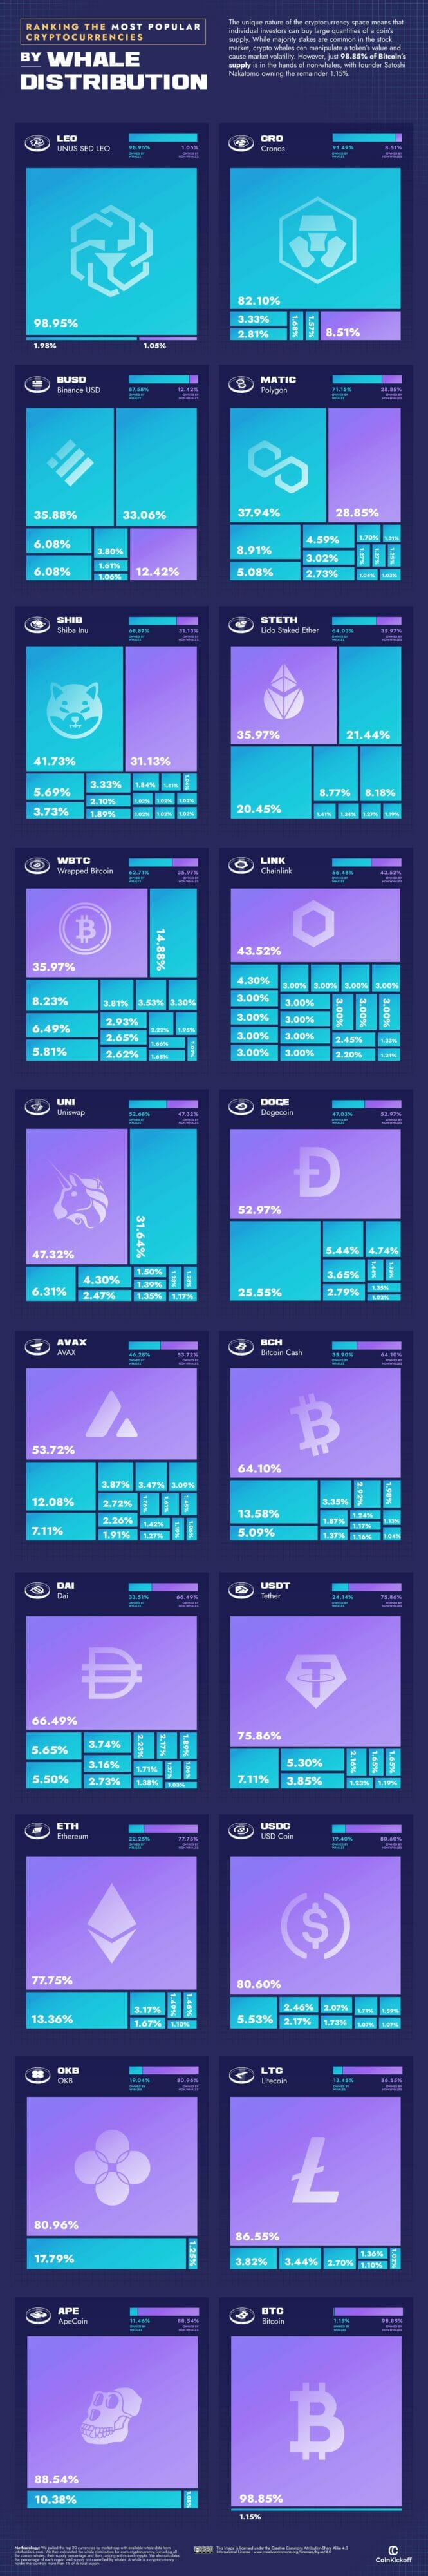 Ranking the Most Popular Cryptocurrencies by Whale Distribution